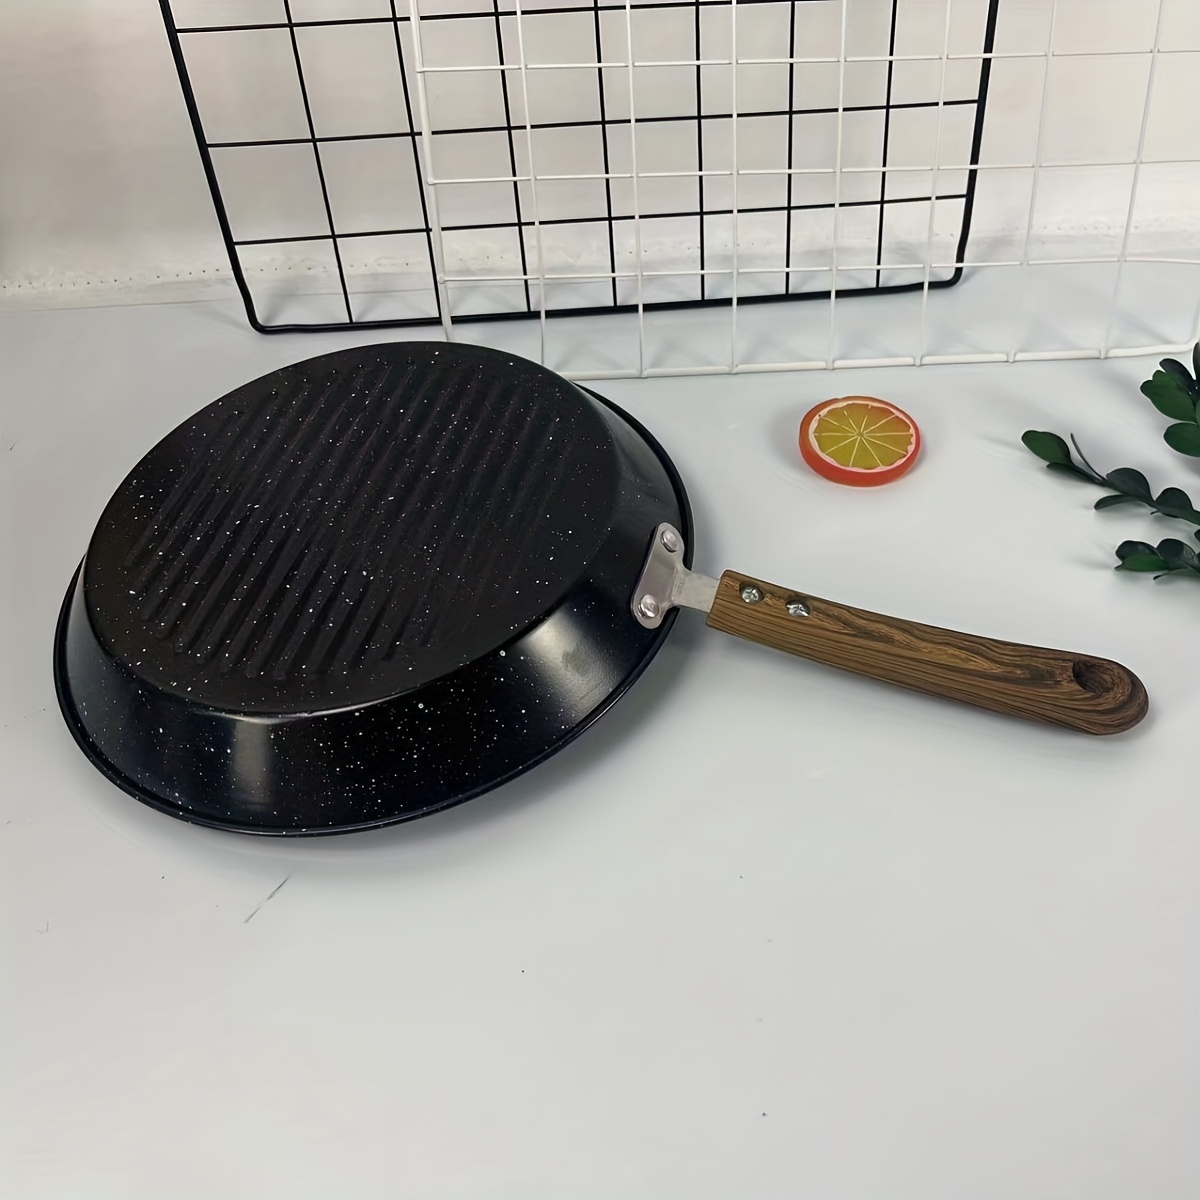 Stove Top Griddles & Grill Pans: Cast Iron & More